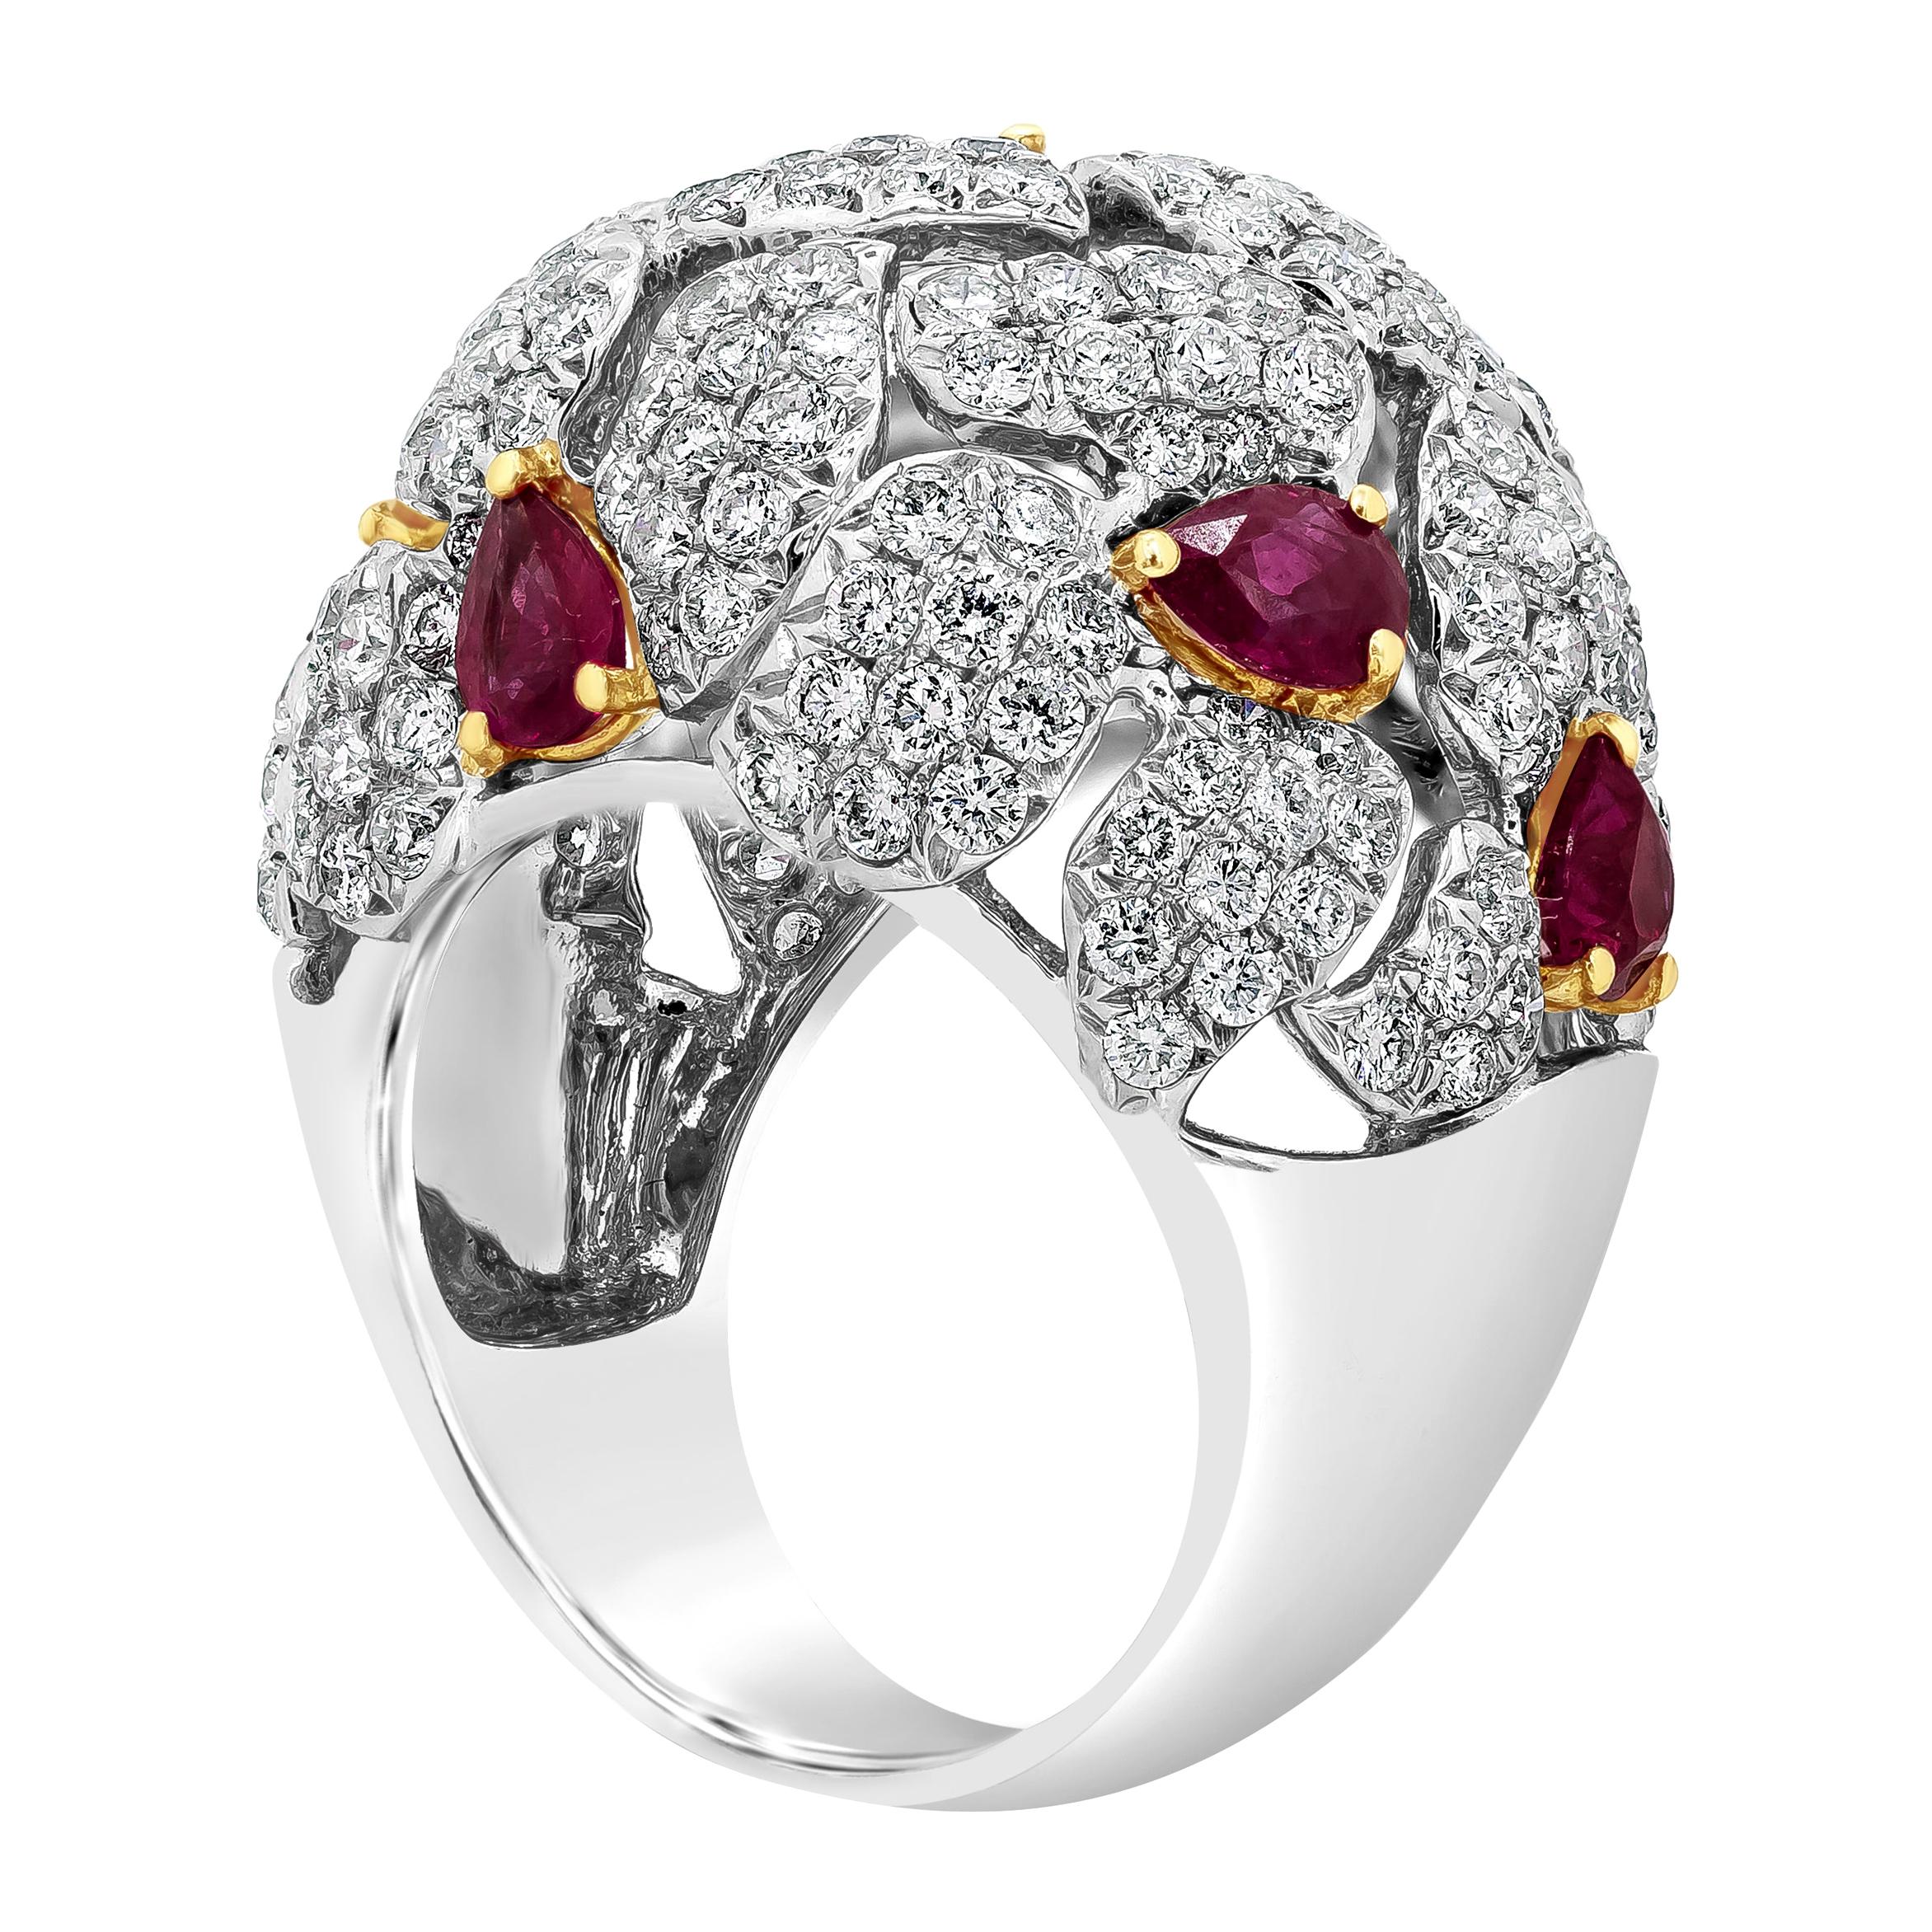 A very beautiful and fashionable ring showcasing a cluster of round brilliant diamonds accented with vibrant pear shape rubies, set in a dome open-work mounting made in 18k white gold. Diamonds weigh 3.76 carats total; rubies weigh 2.67 carats